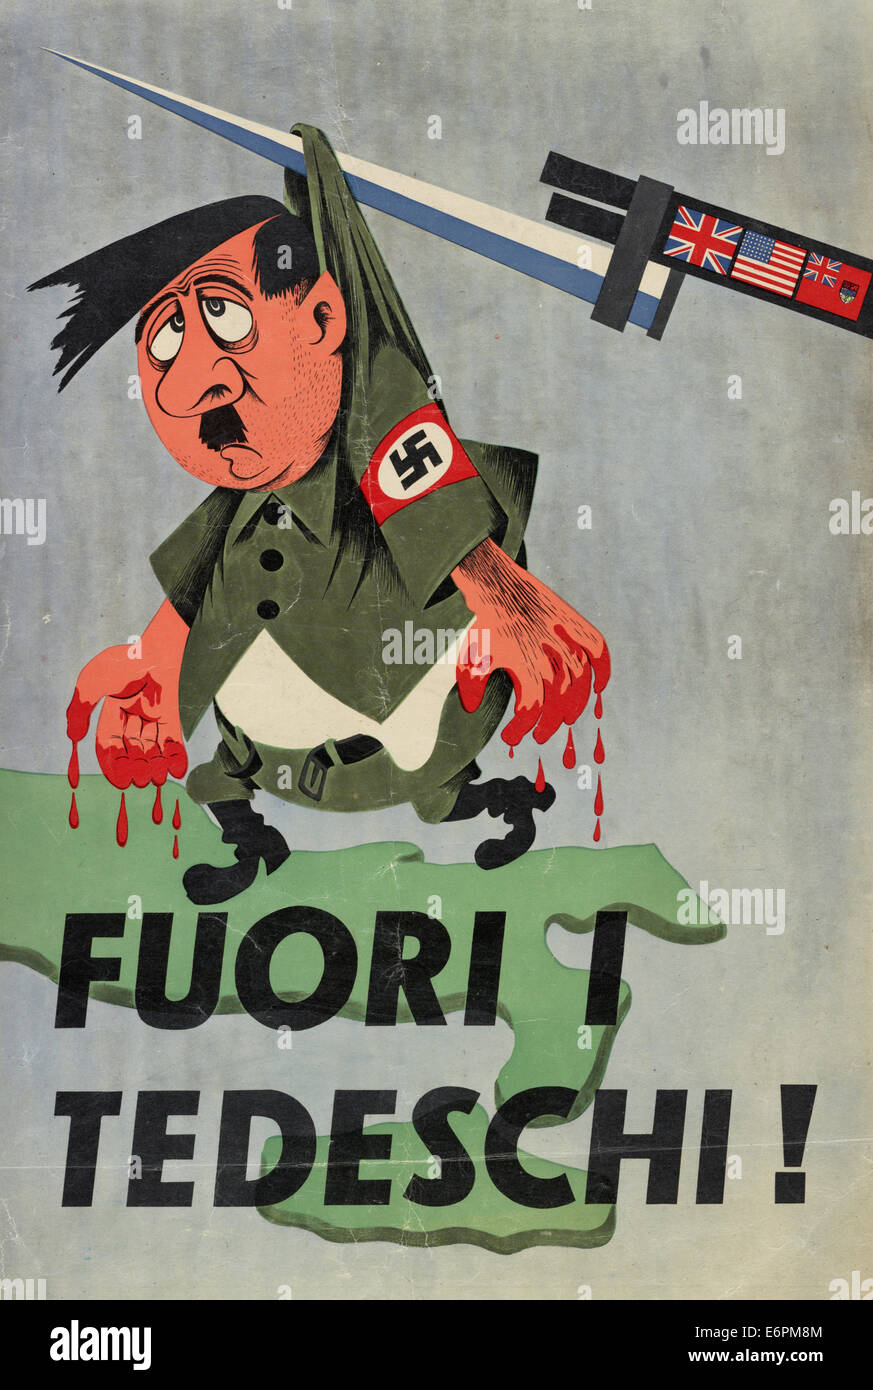 Fuori i tedeschi! -  Poster shows a caricatured Adolf Hitler with blood on his hands hanging from a bayonet, circa 1943 Stock Photo